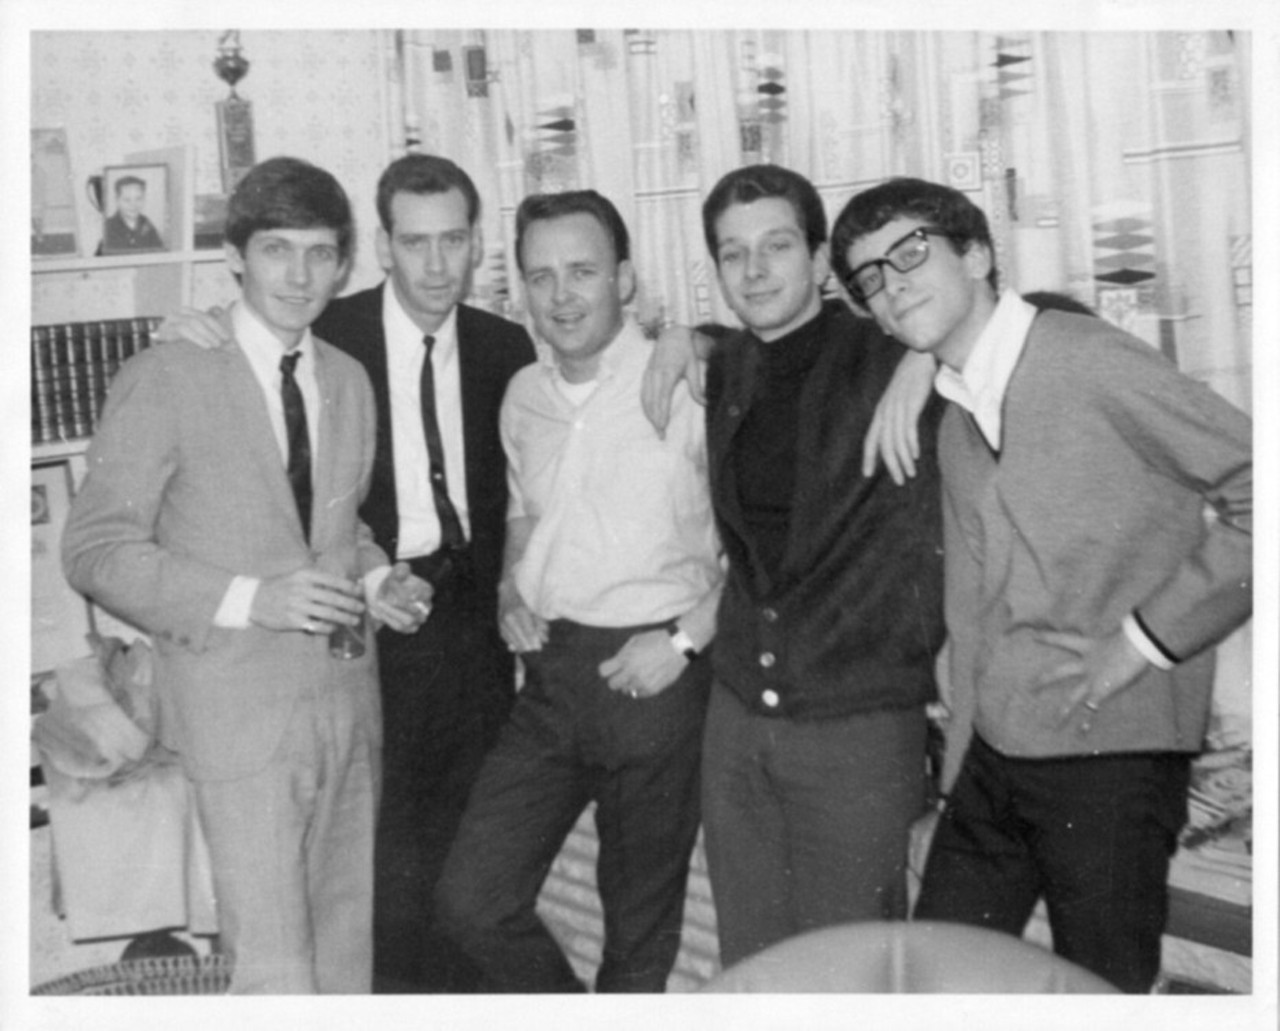 Ike and Tina weren't the only big names, of course. Billy Joe Royal, Jim Brown, Bob Kuban, Jonnie King and Gary Lewis at Club Imperial on April 18, 1966